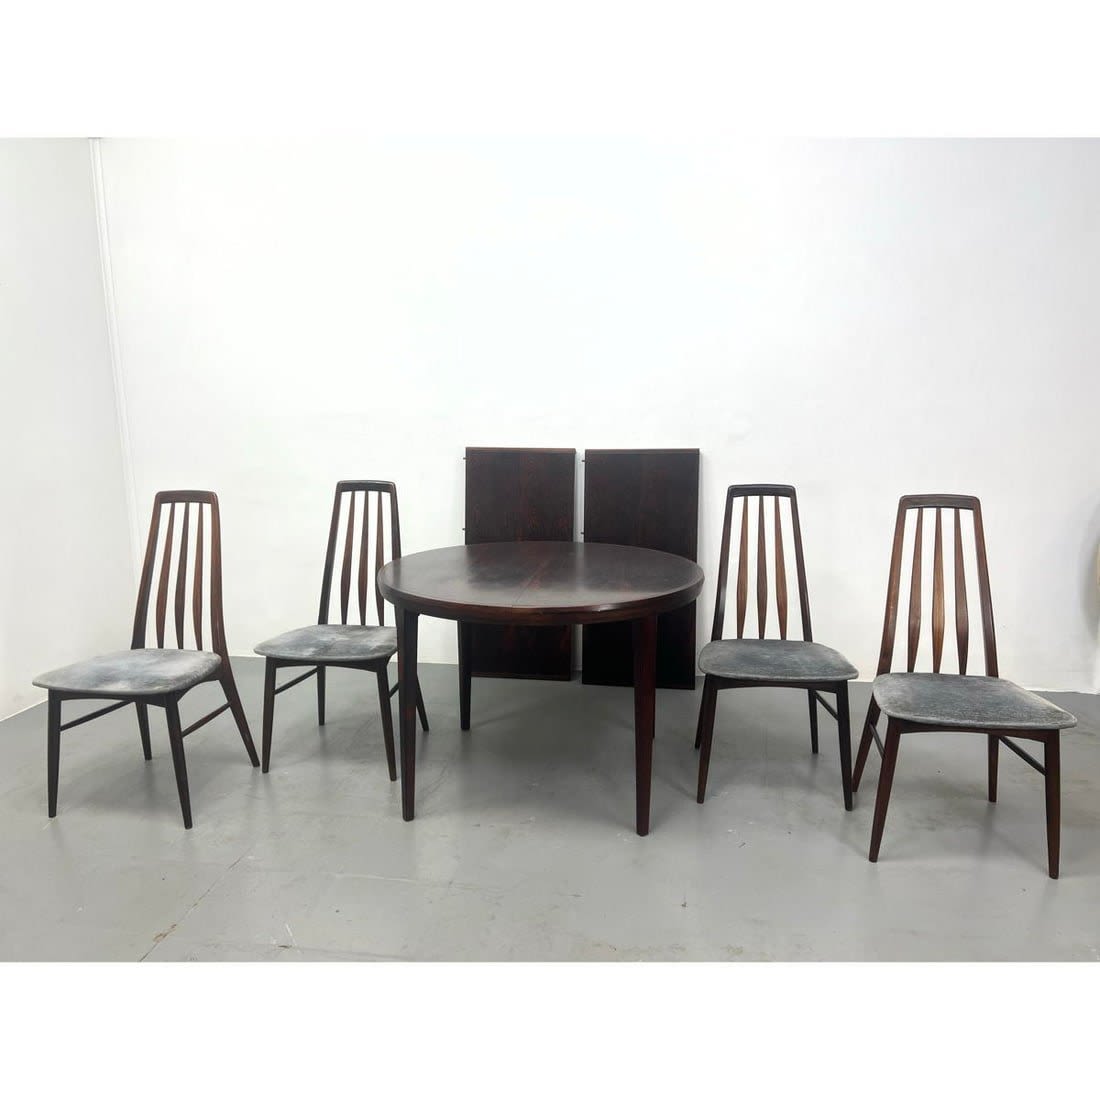 5pc Rosewood Dining Table Chairs.